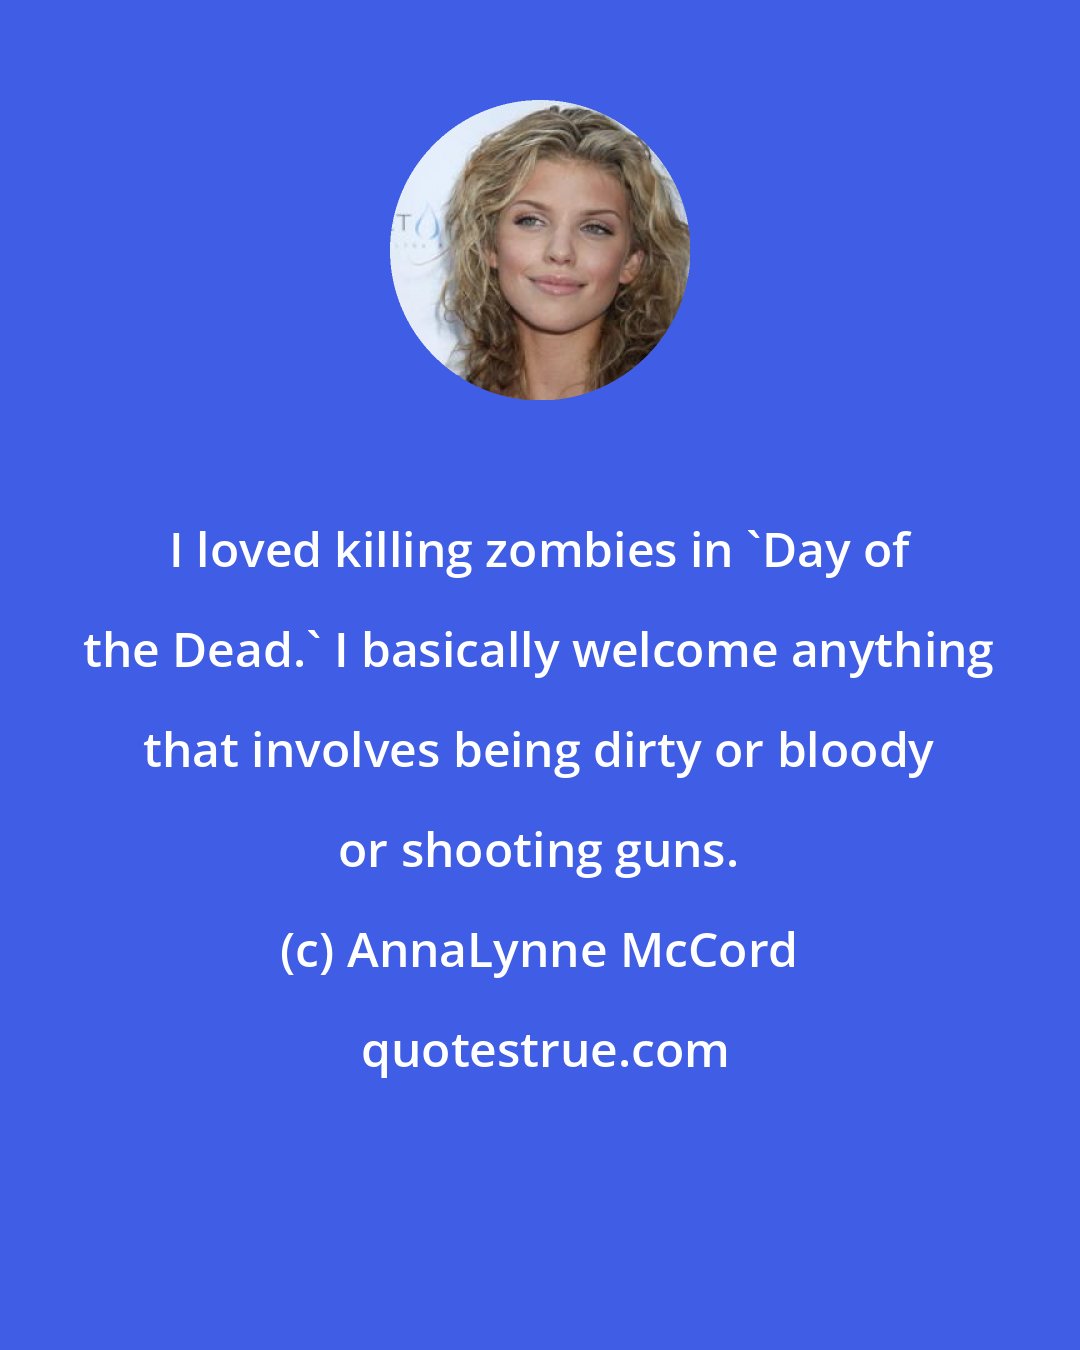 AnnaLynne McCord: I loved killing zombies in 'Day of the Dead.' I basically welcome anything that involves being dirty or bloody or shooting guns.